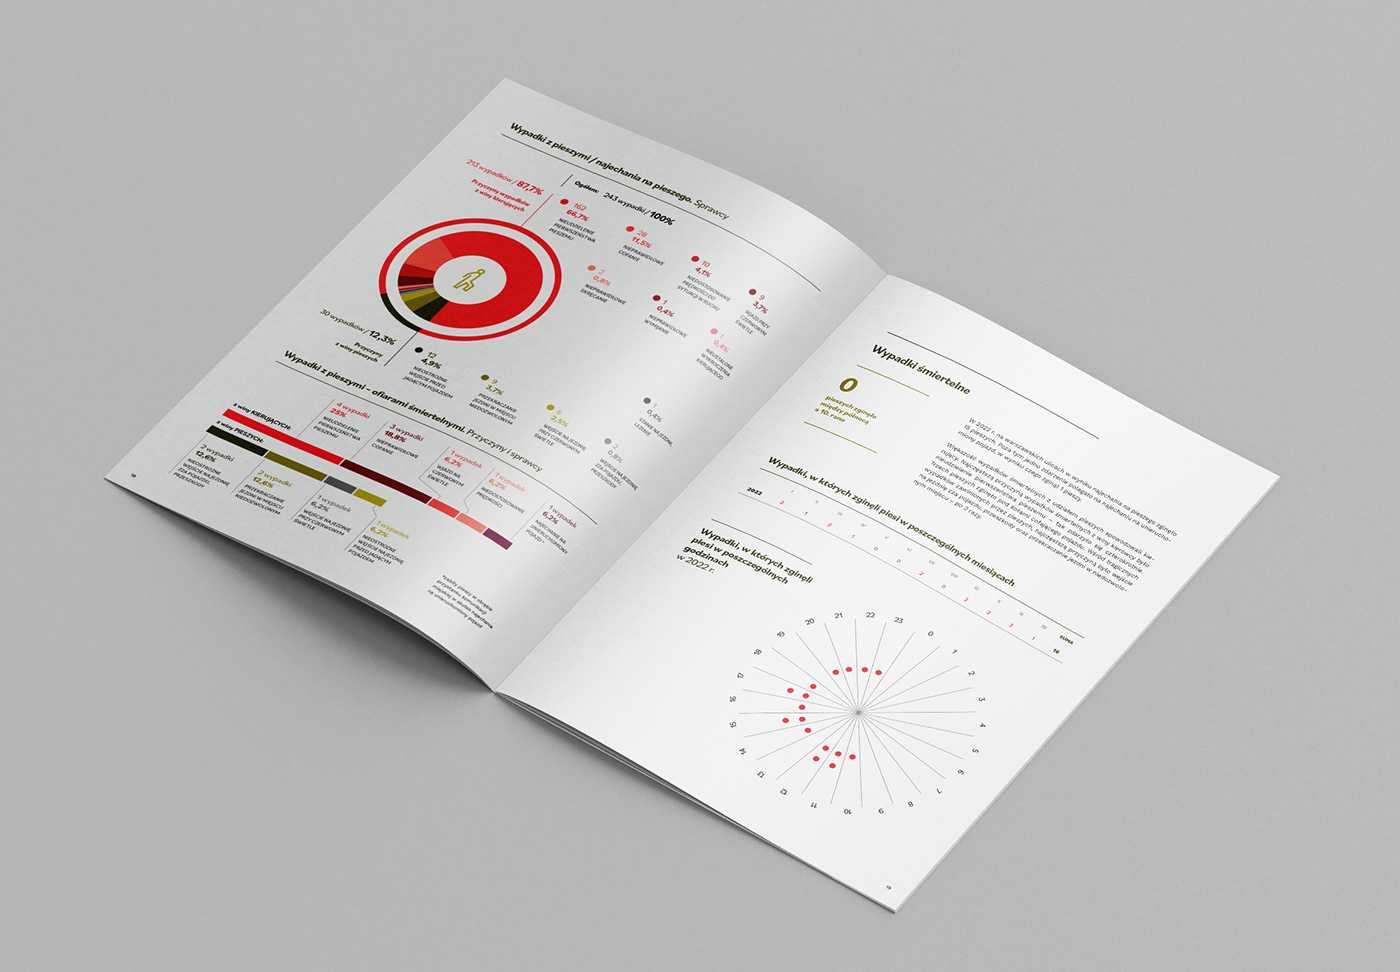 report print design  infographic safety data visualization publication InDesign Layout brochure